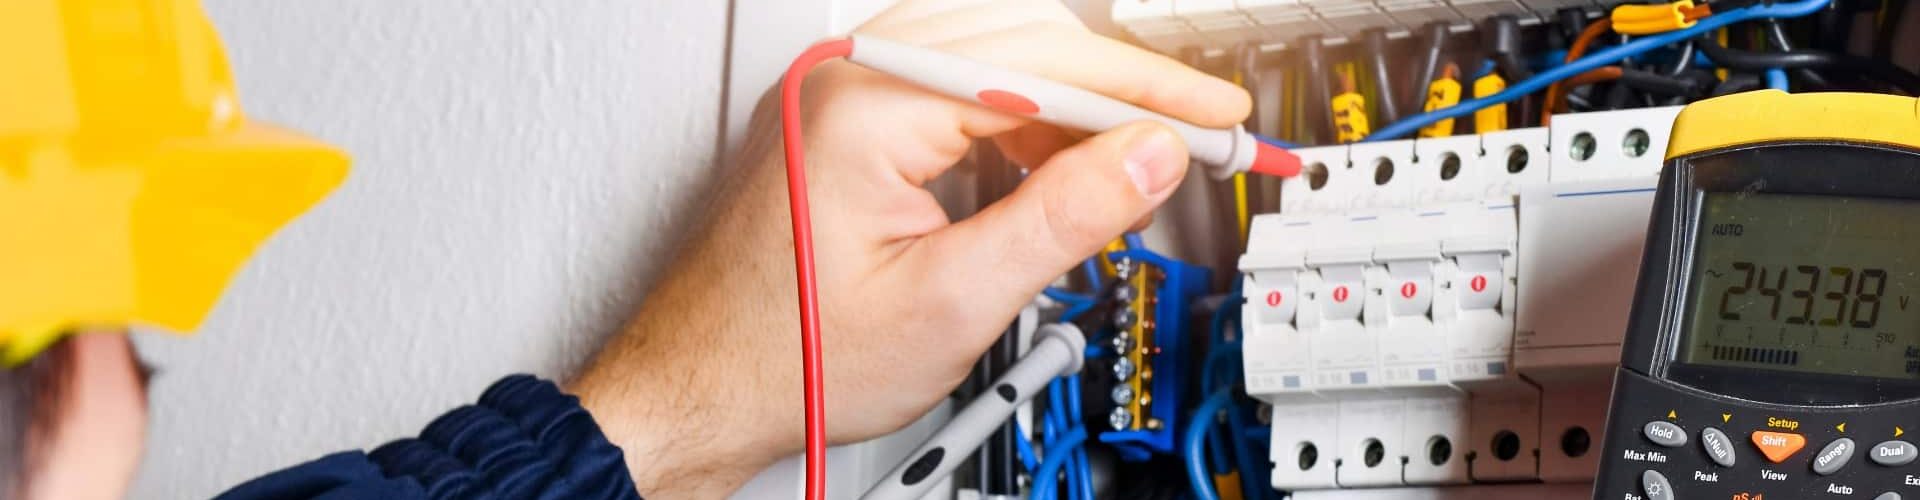 Cropped electrician installing electric cable wires of fuse switch box 1.jpg